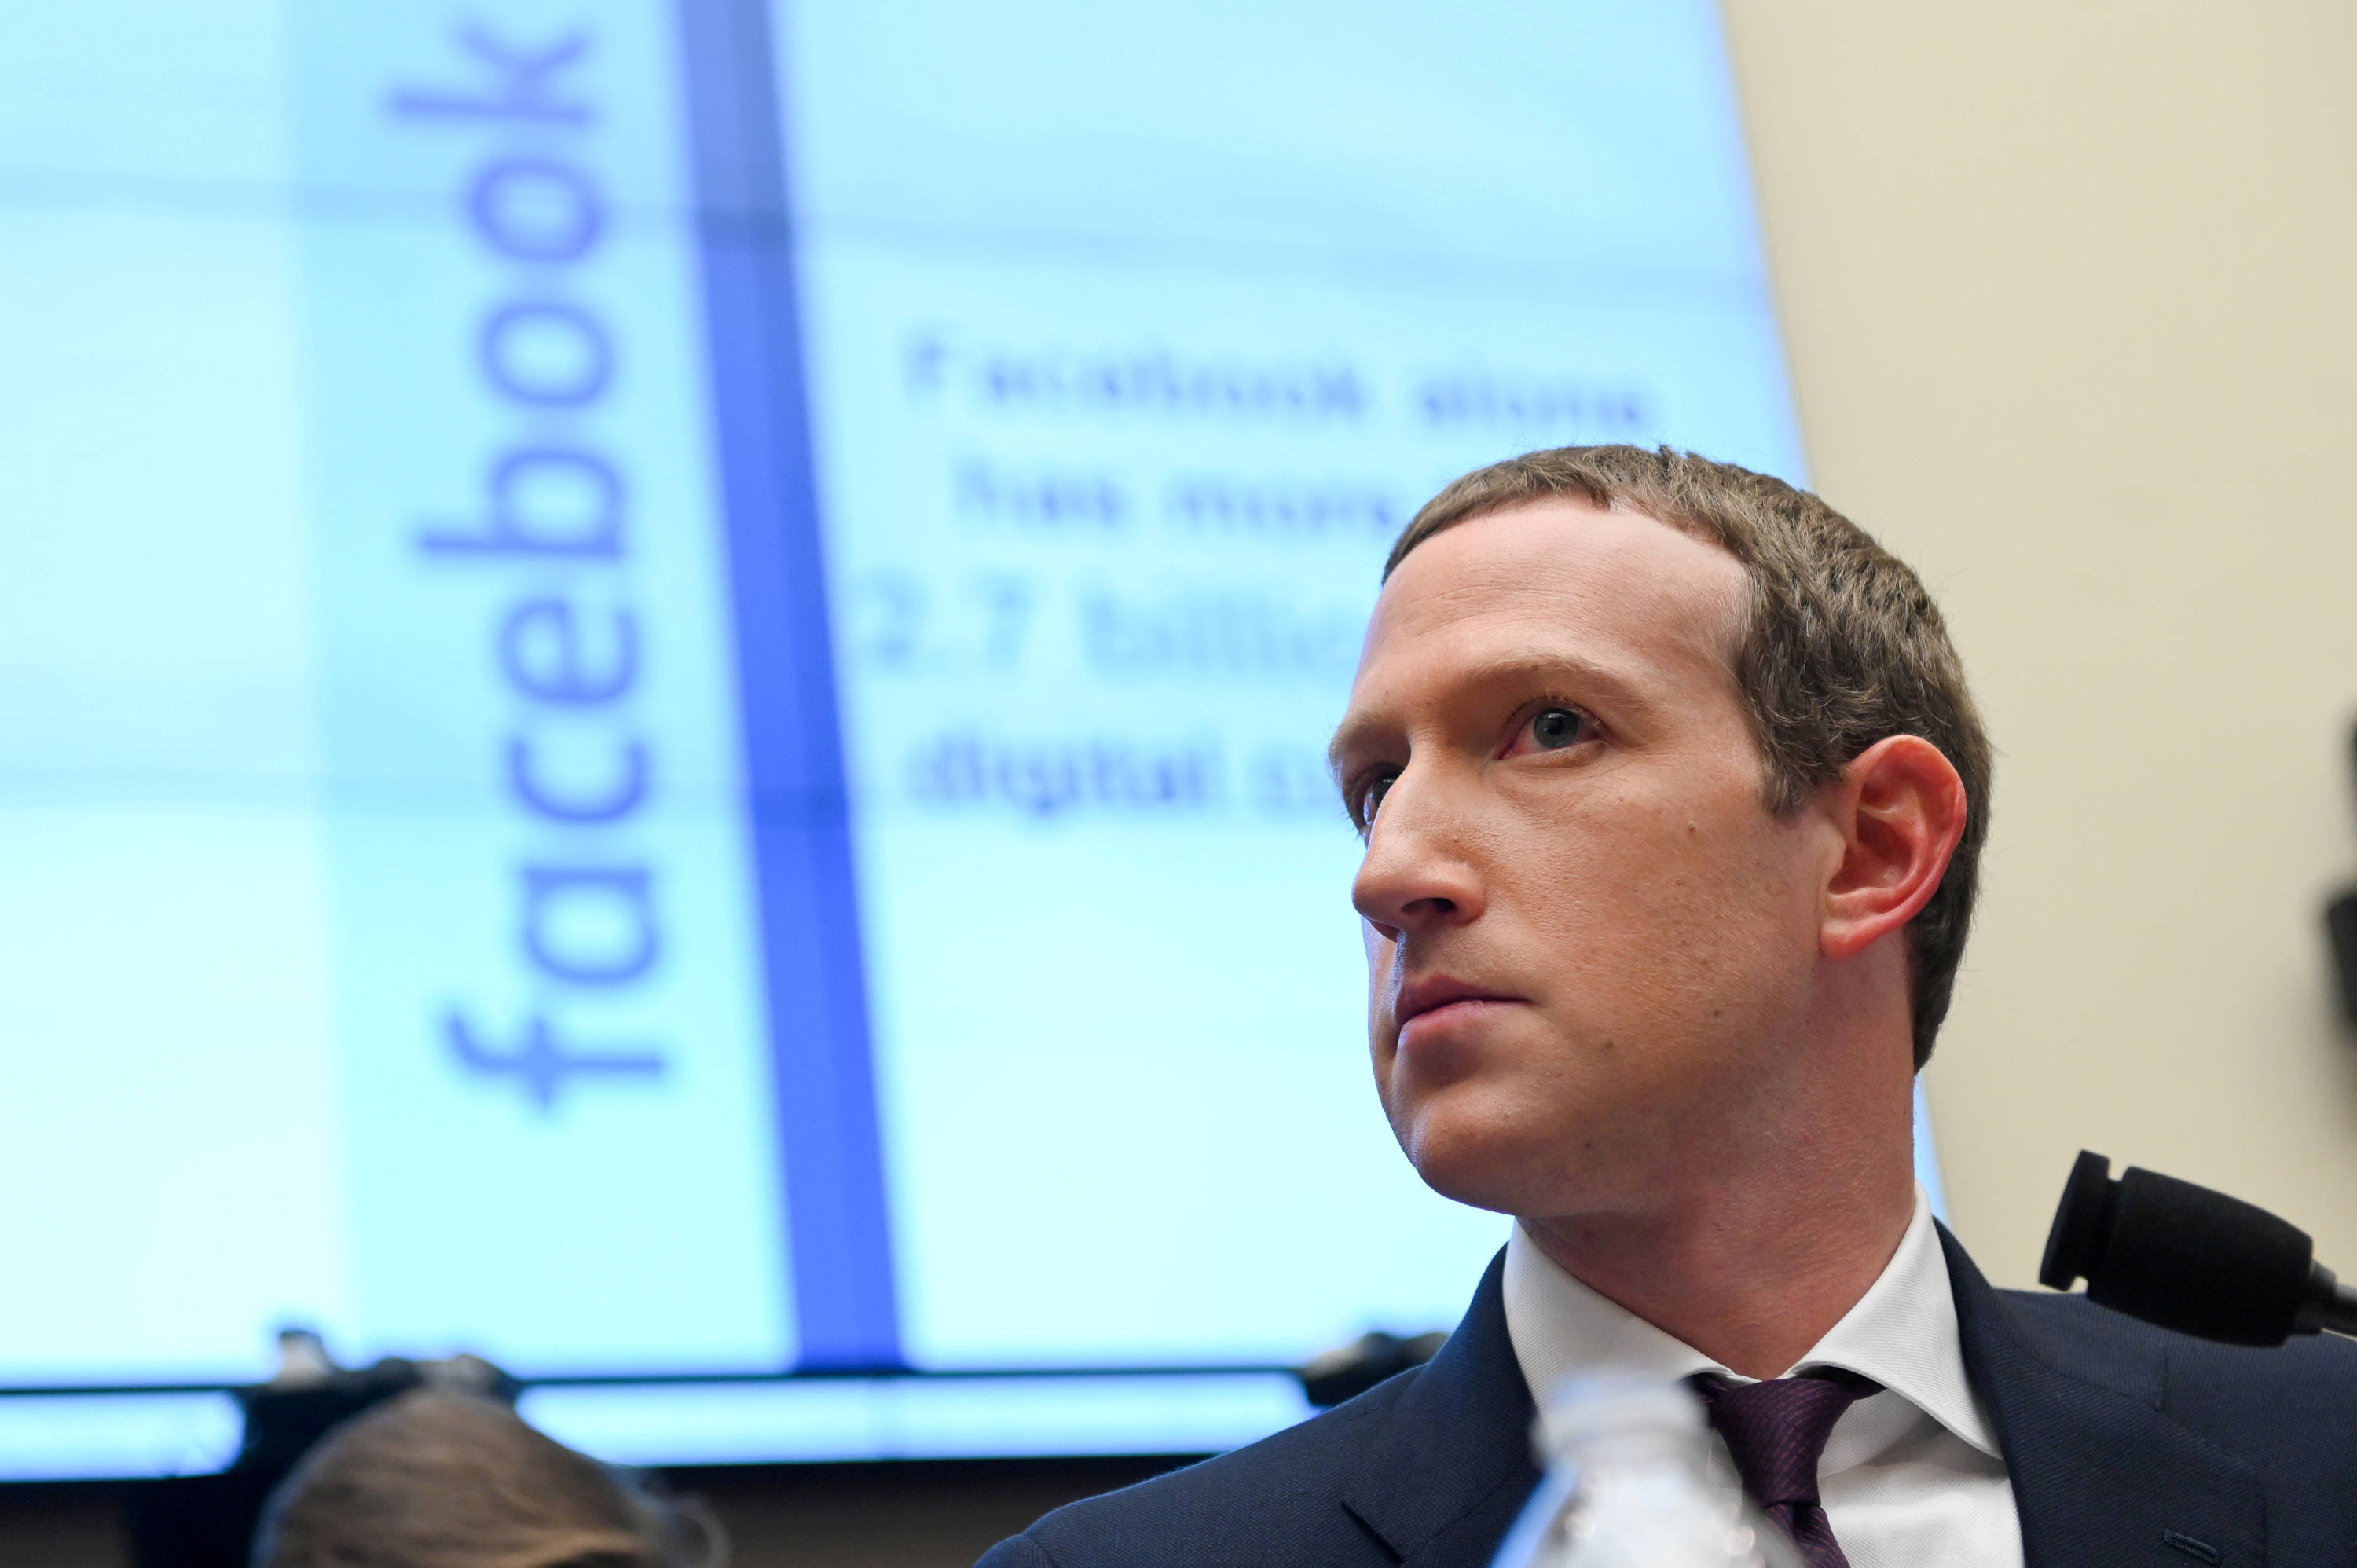 Facebook CEO Mark Zuckerberg testifies at a House Financial Services Committee hearing in Washington on Oct. 23, 2019. (Erin Scott/Reuters)